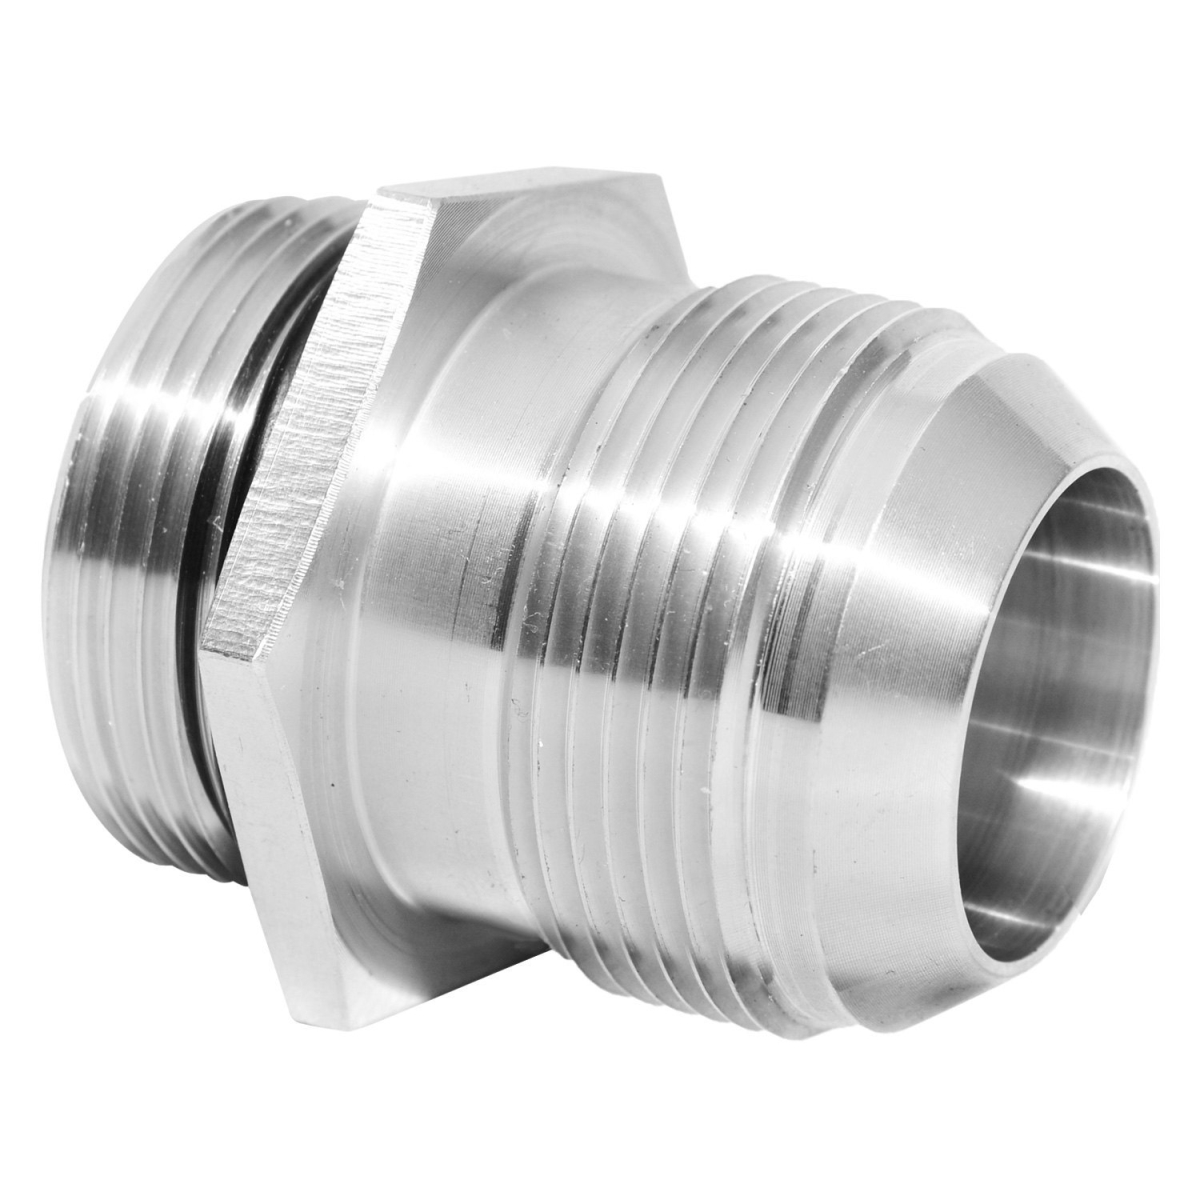 78-00102 -20 An Inlet Straight Cut O-ring Fitting